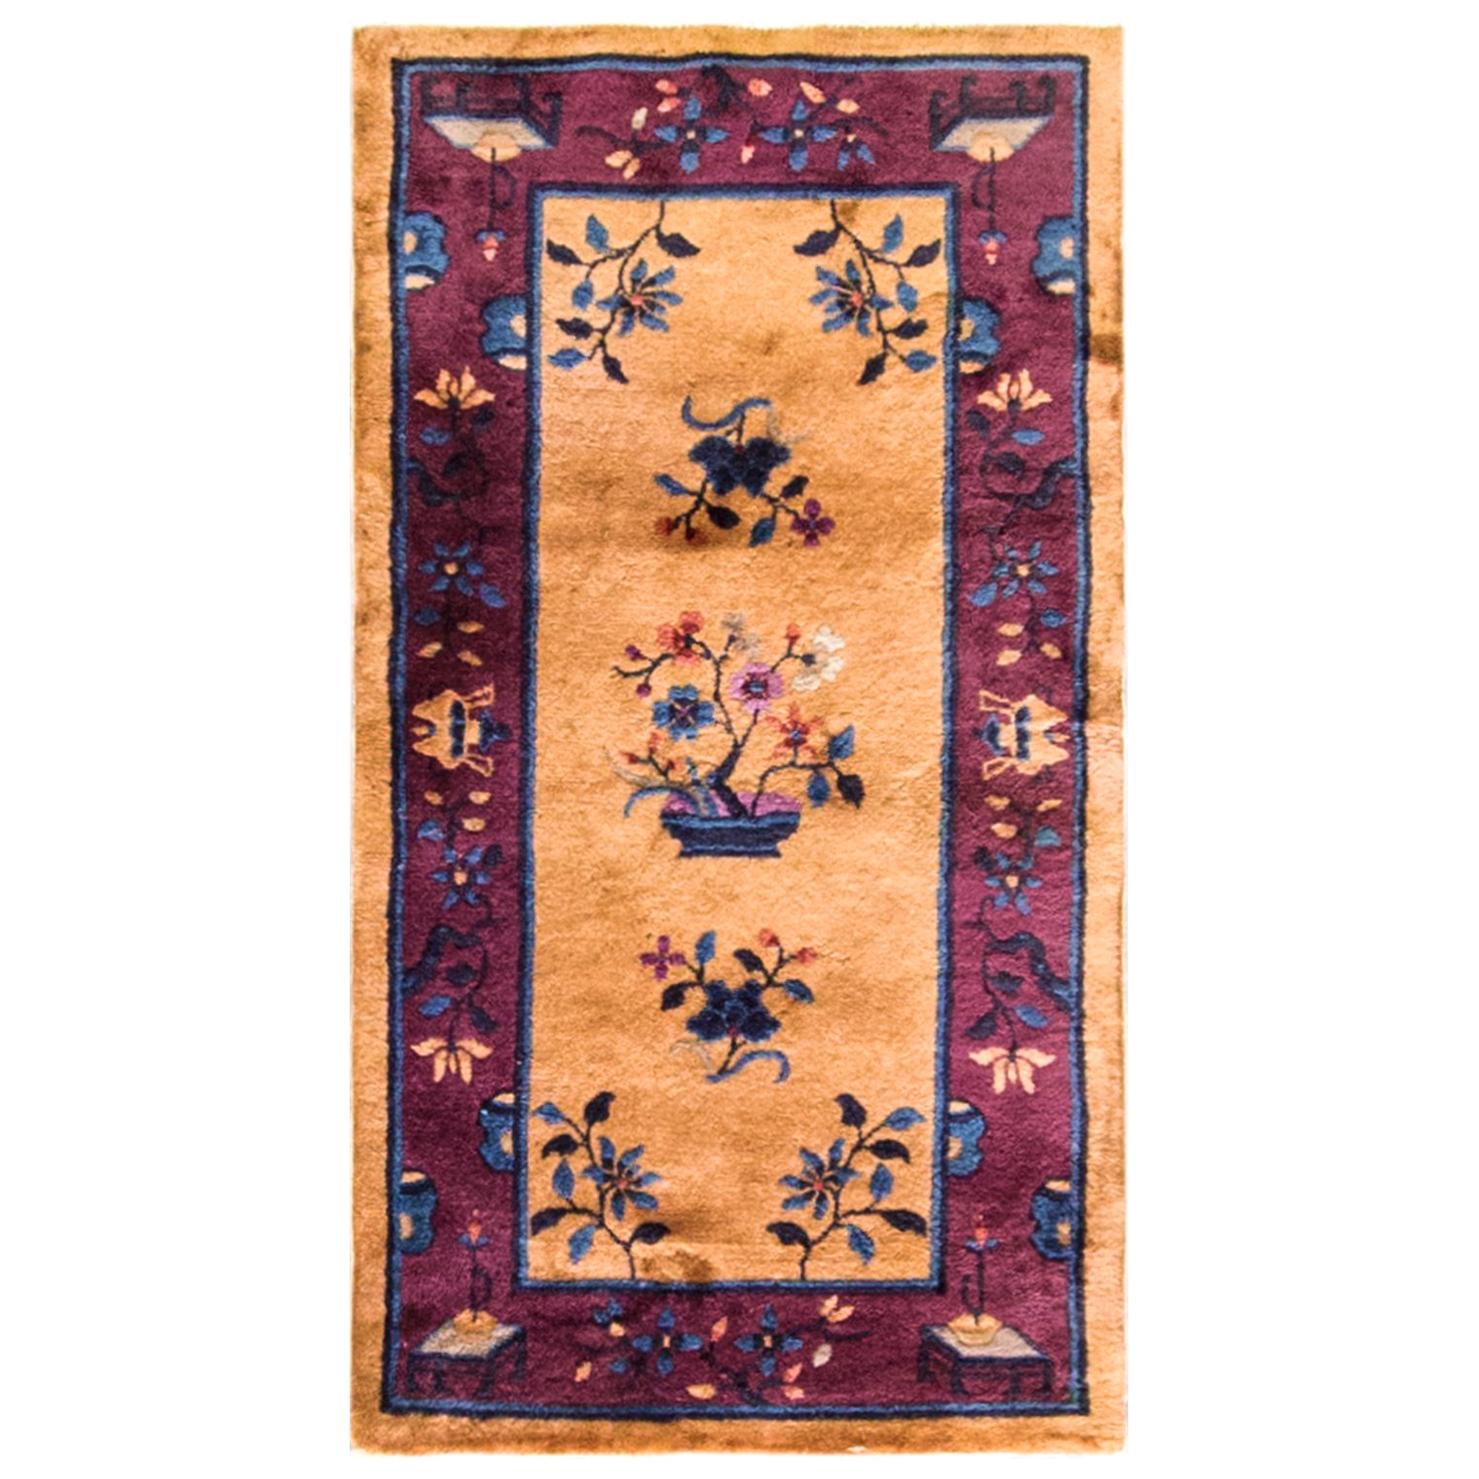  Antique Art Deco Chinese Oriental Rug, Magnificent For Sale